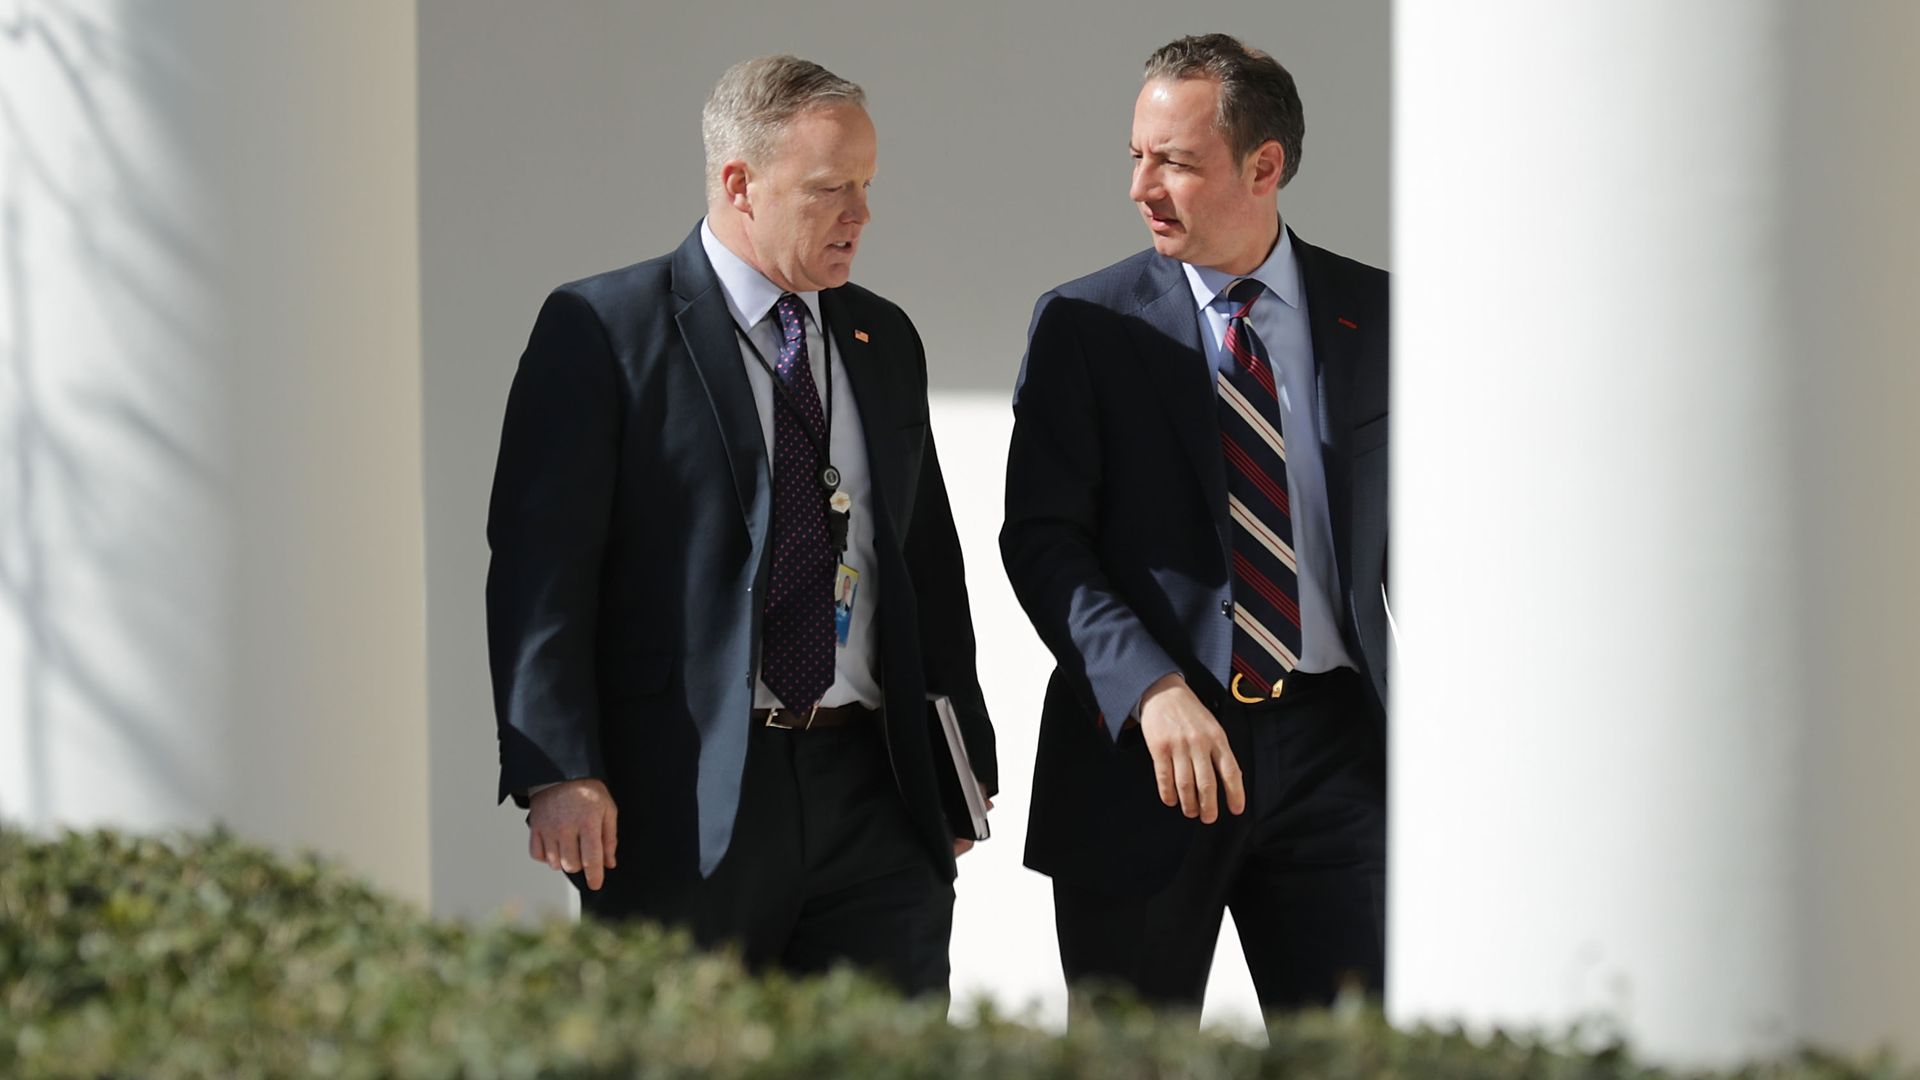 Sean Spicer and Reince Priebus.